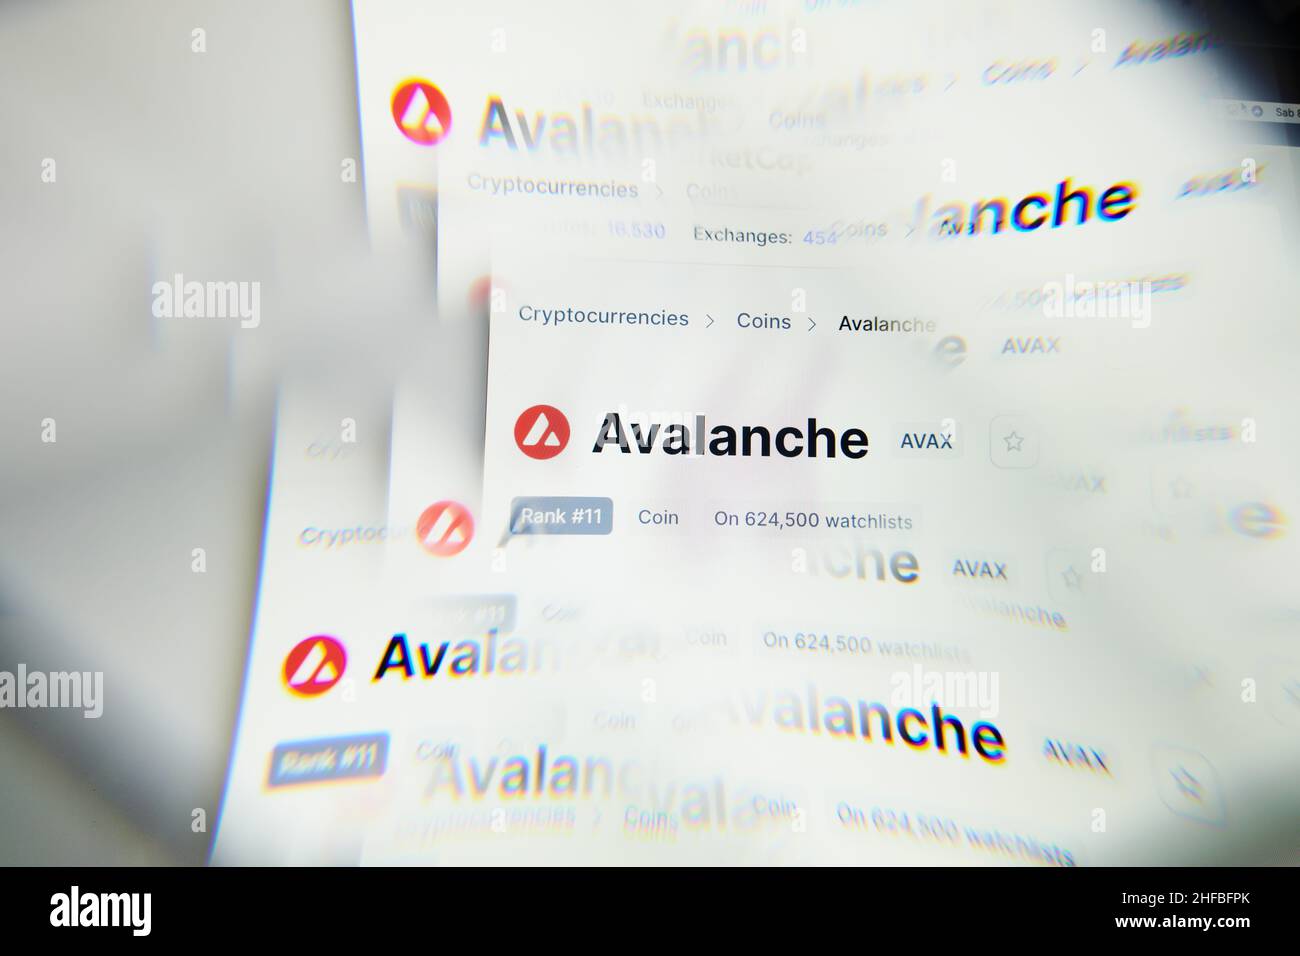 Milan, Italy - January 11, 2022: avalanche - AVAX logo on laptop screen seen through an optical prism. Dynamic and unique image form avalanche, AVAX c Stock Photo